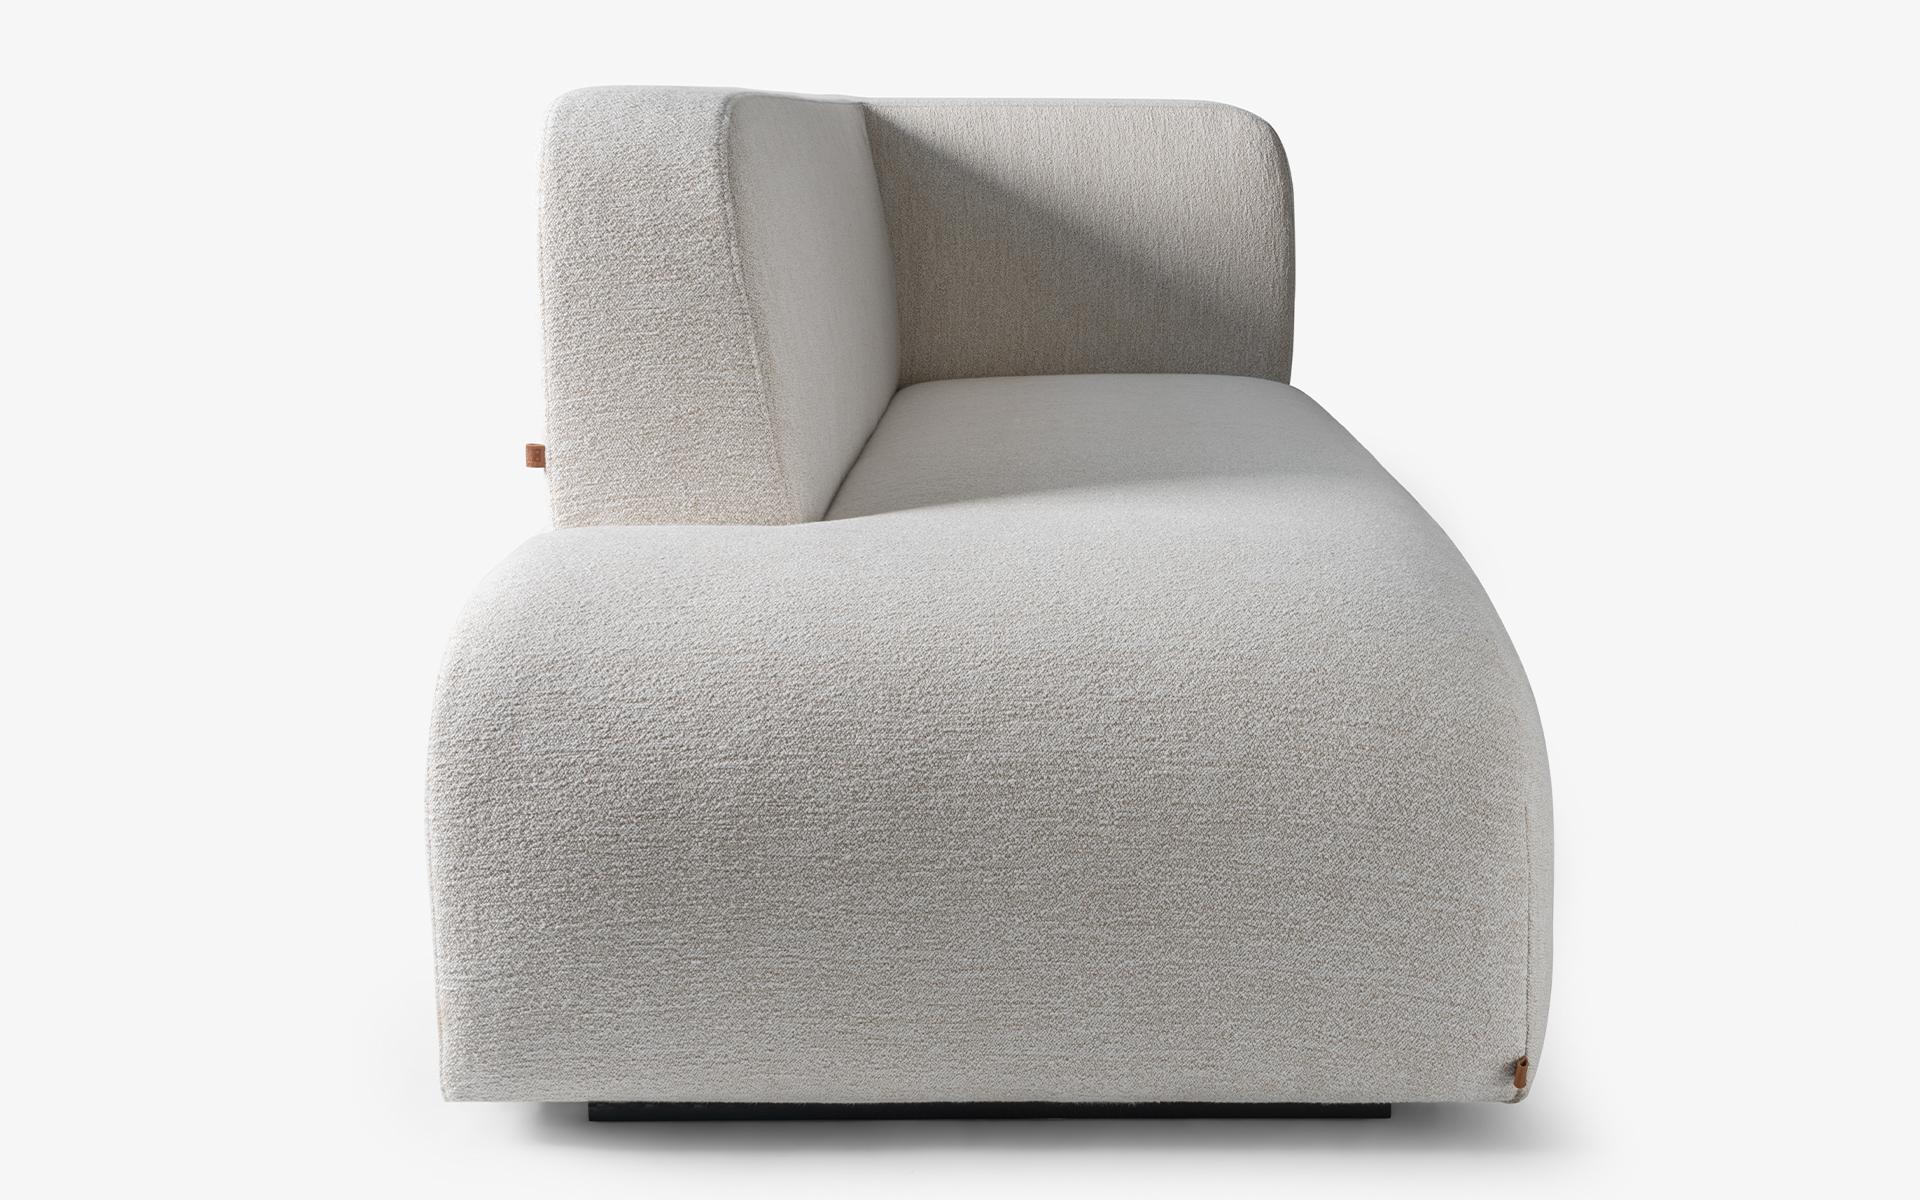 Turkish Dottie Lounge Module Seating Daybed For Sale